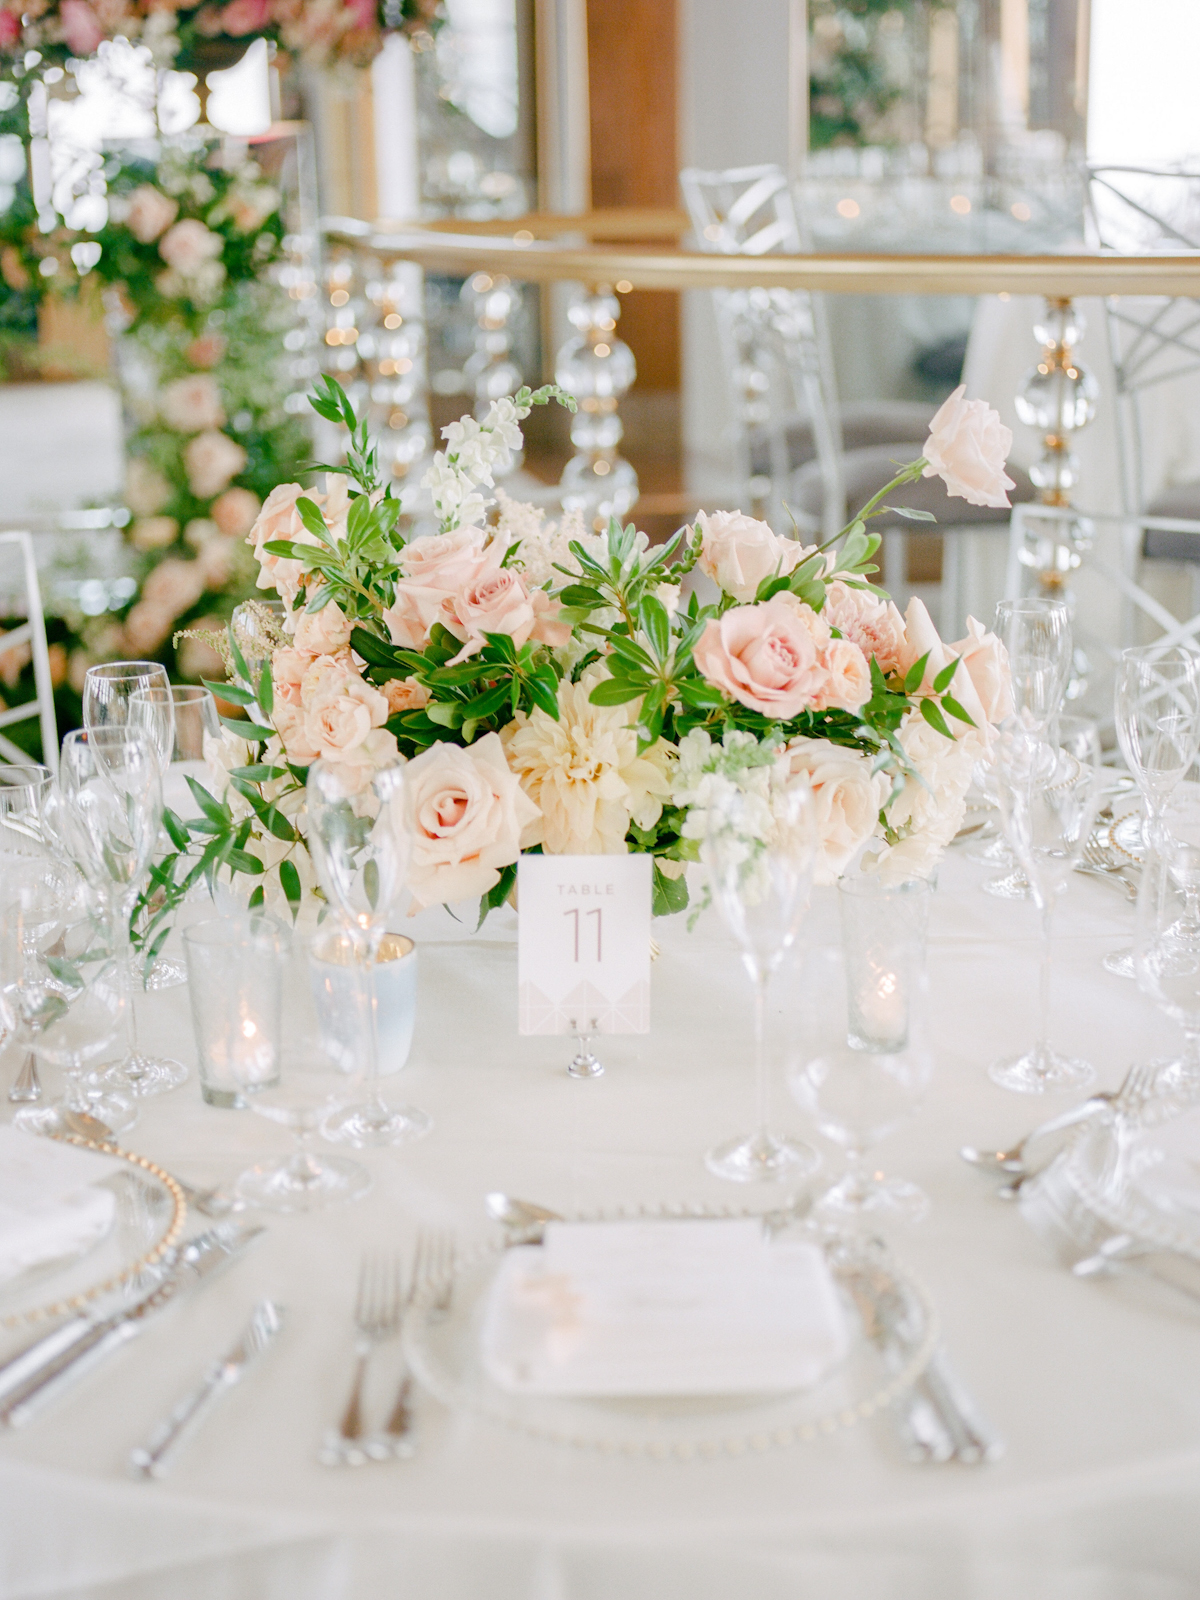 Rainbow Room wedding tablescape with flowers, votives, menus and vellum place cards